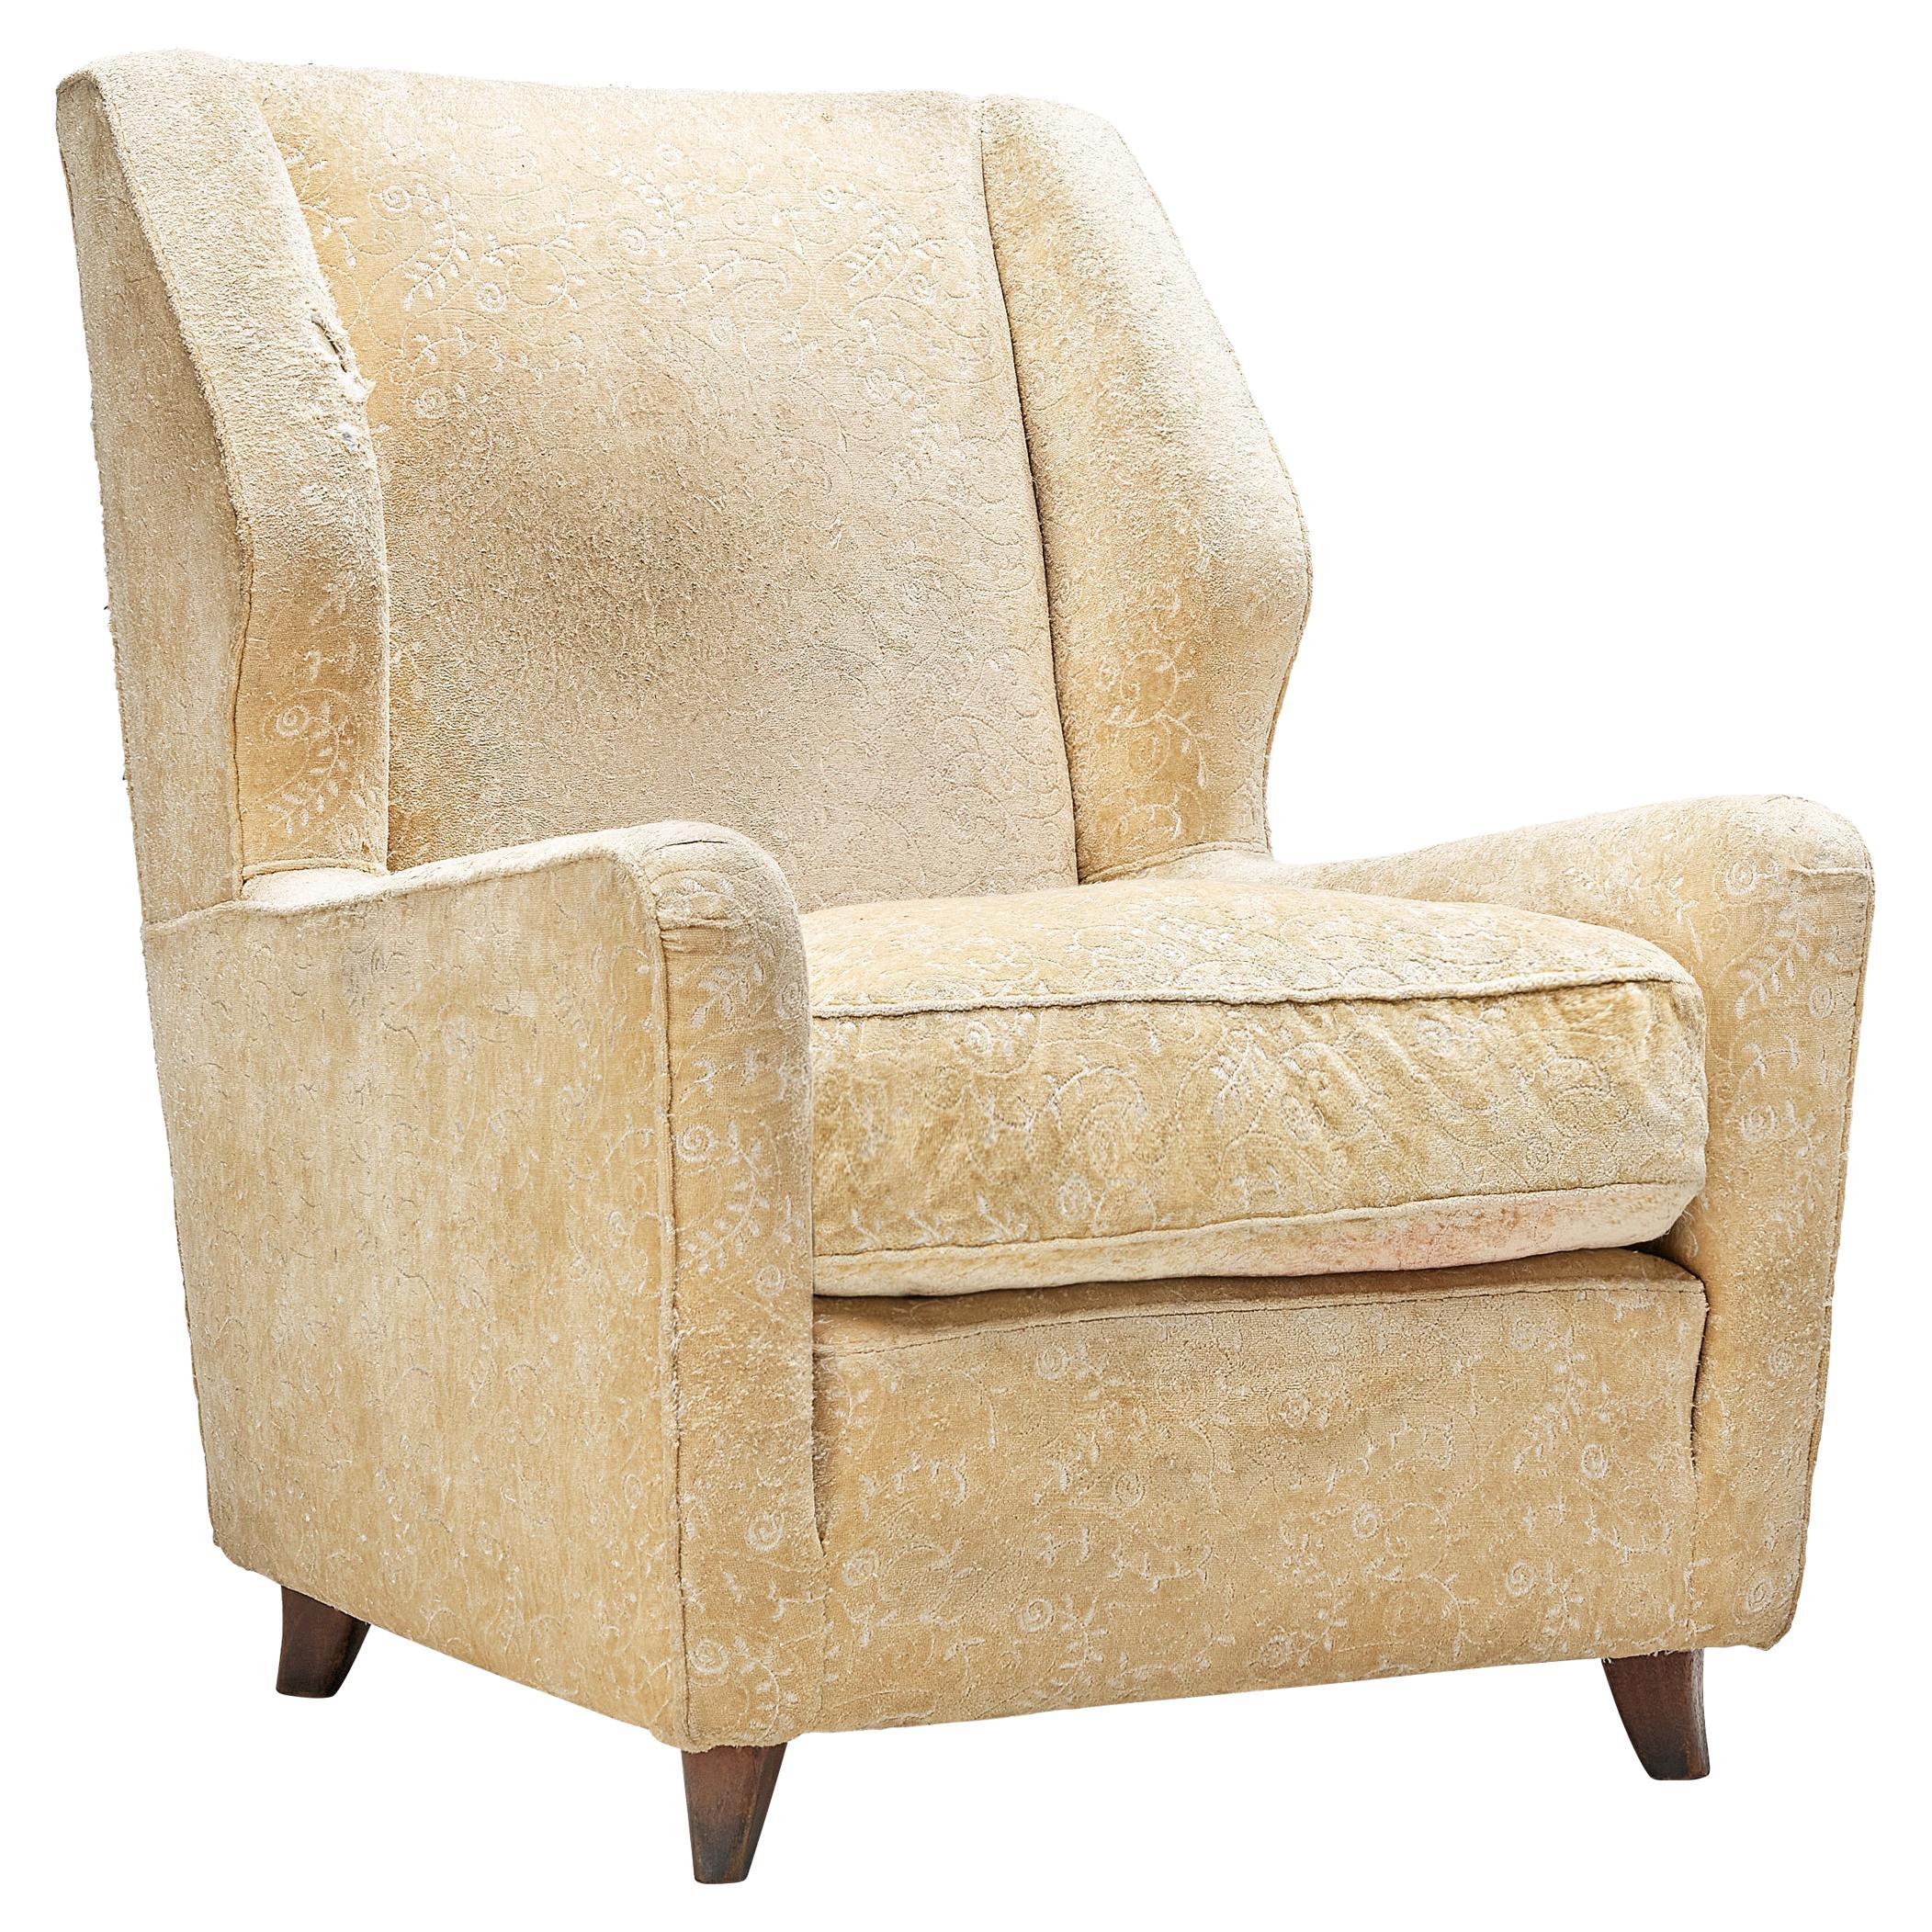 Danish Wingback Chair in Beige Floral Upholstery  For Sale